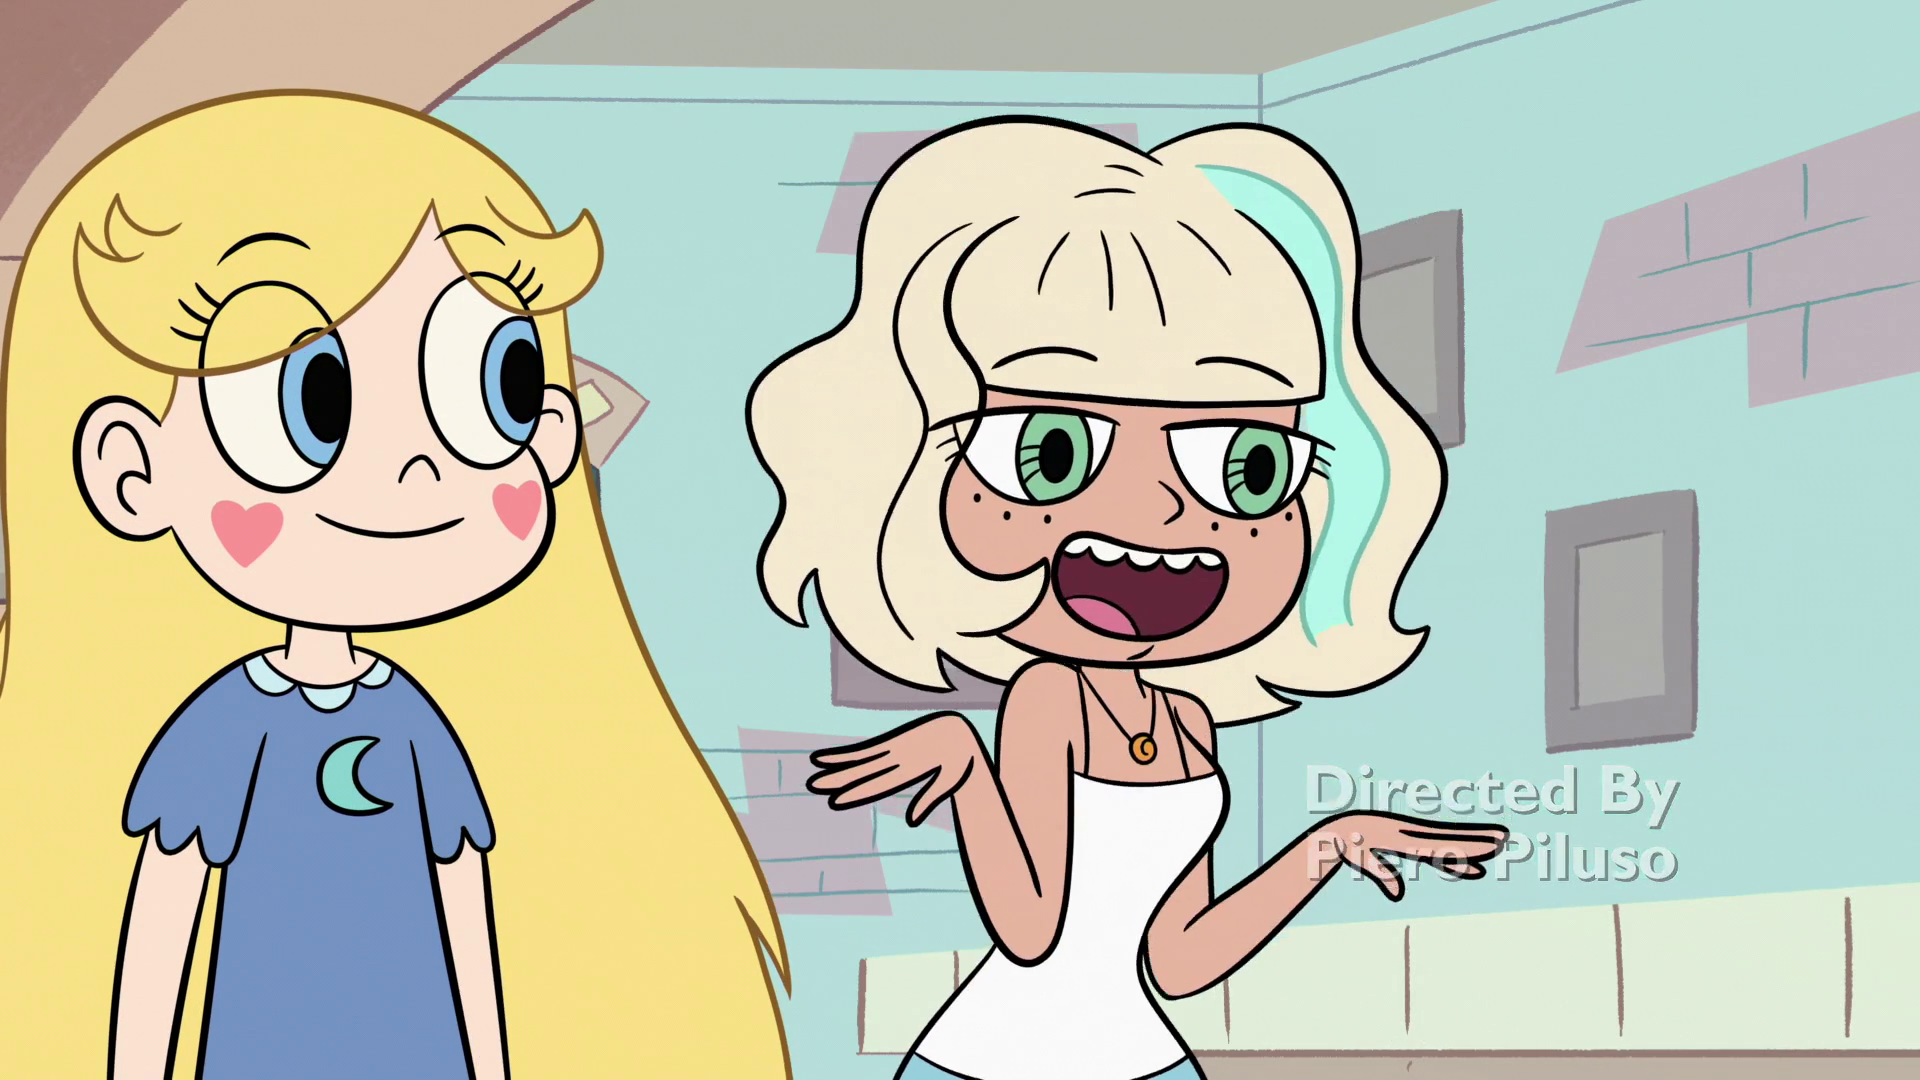 Star Vs the forces of chaos.